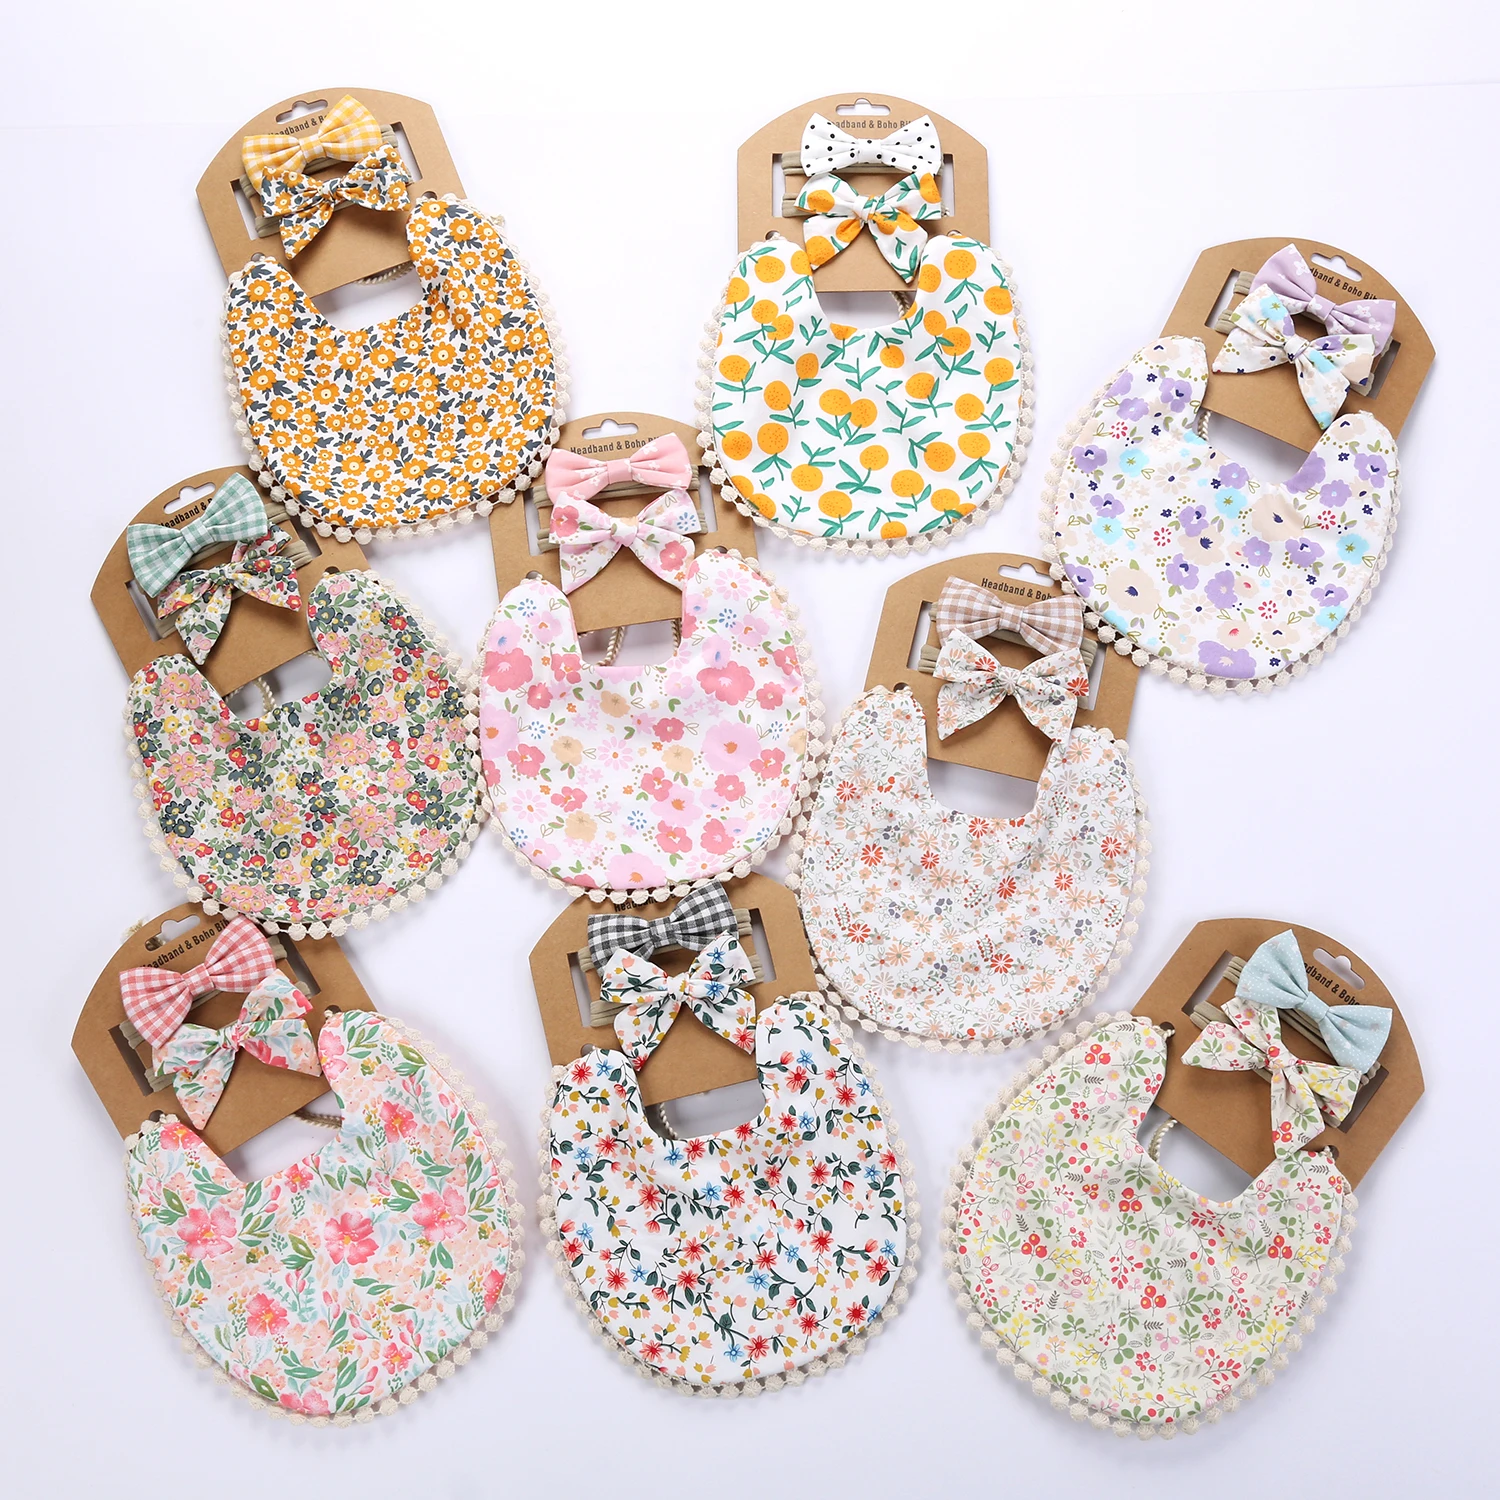 

New 3pc/set Infant Baby Girl Bibs Double Side Cotton Embroidery Bibs Toddler Saliva Towel Feeding Burp Kid Clothes With Bows